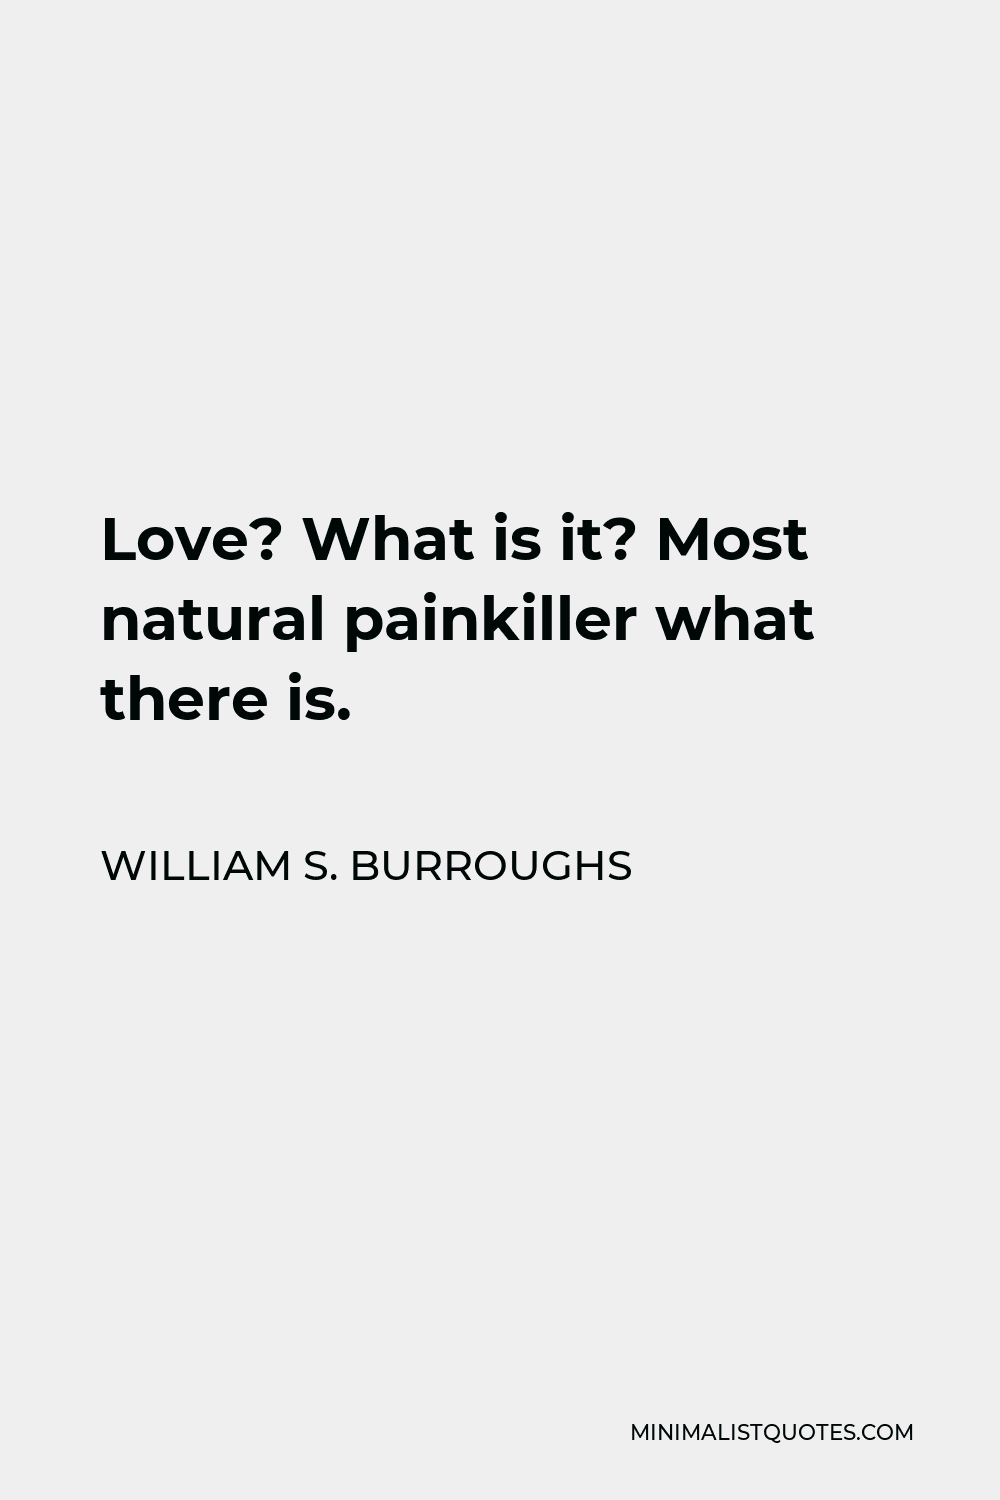 William S. Burroughs Quote - Love? What is it? Most natural painkiller what there is.